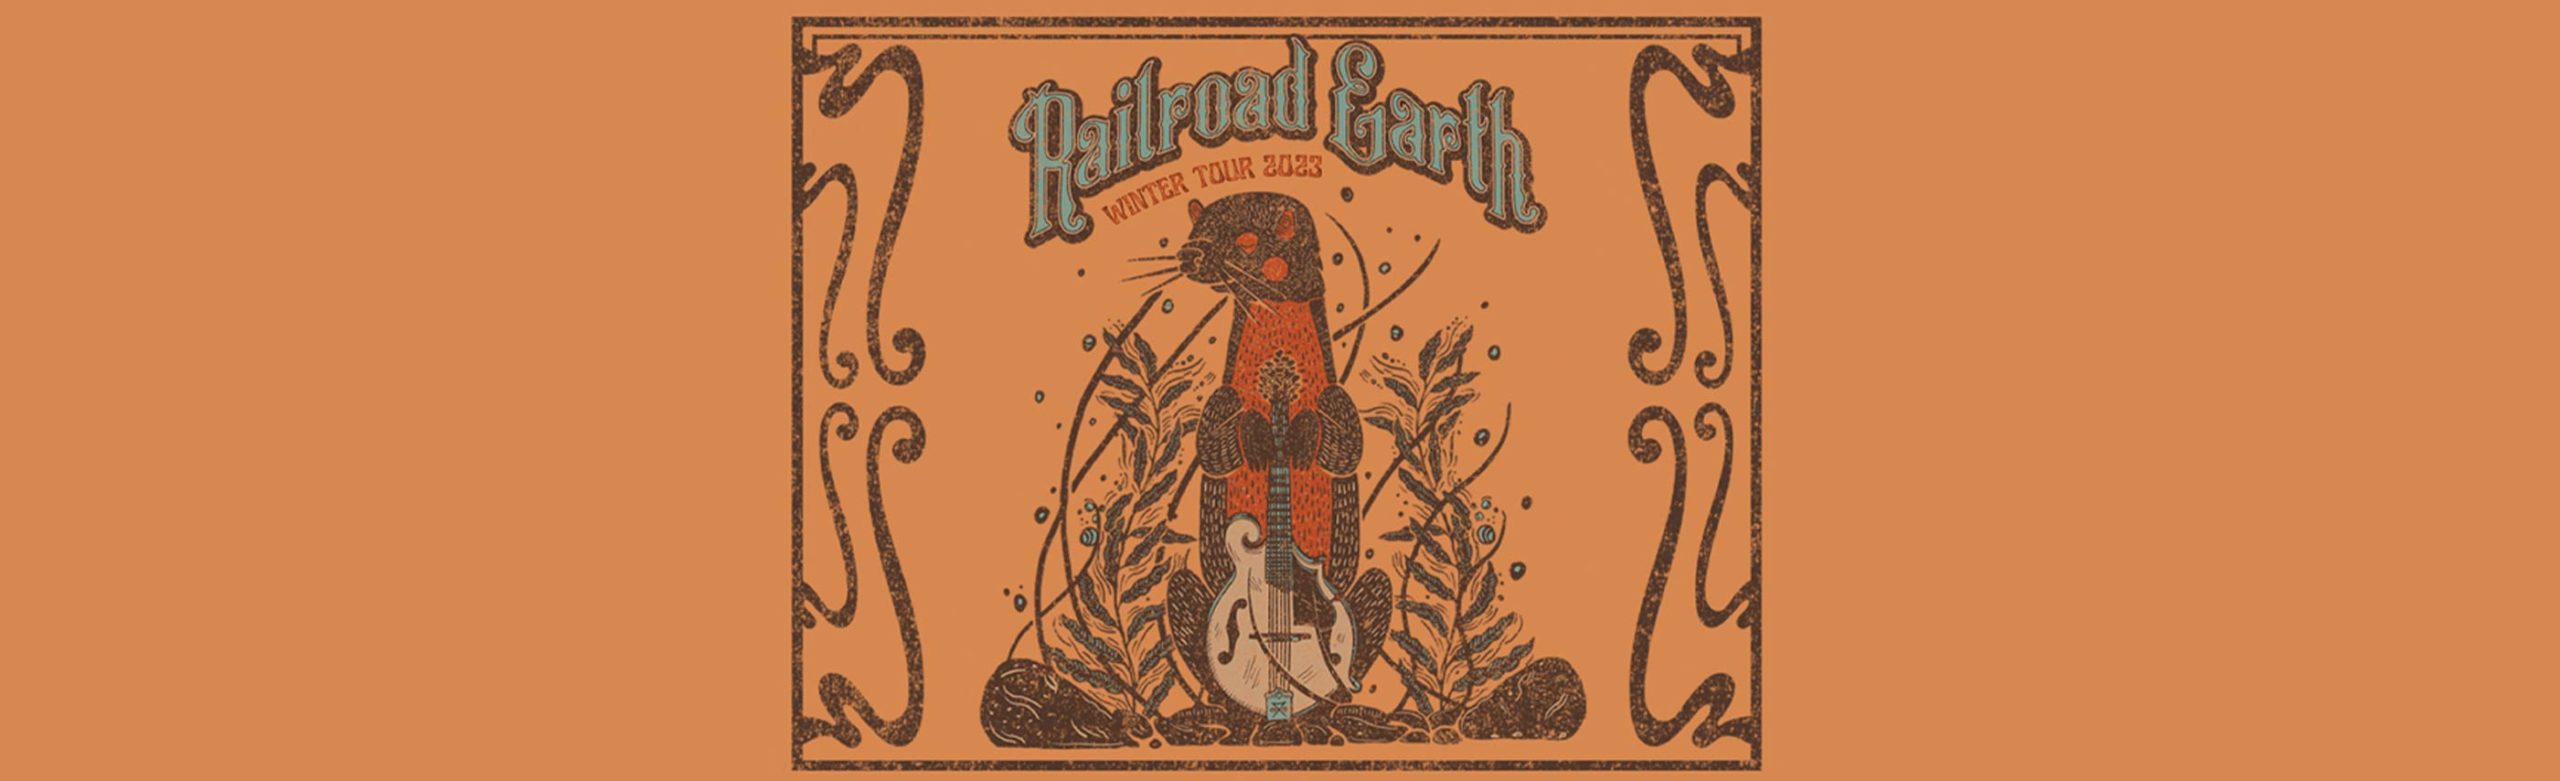 Event Info: Railroad Earth at The Wilma 2023 Image